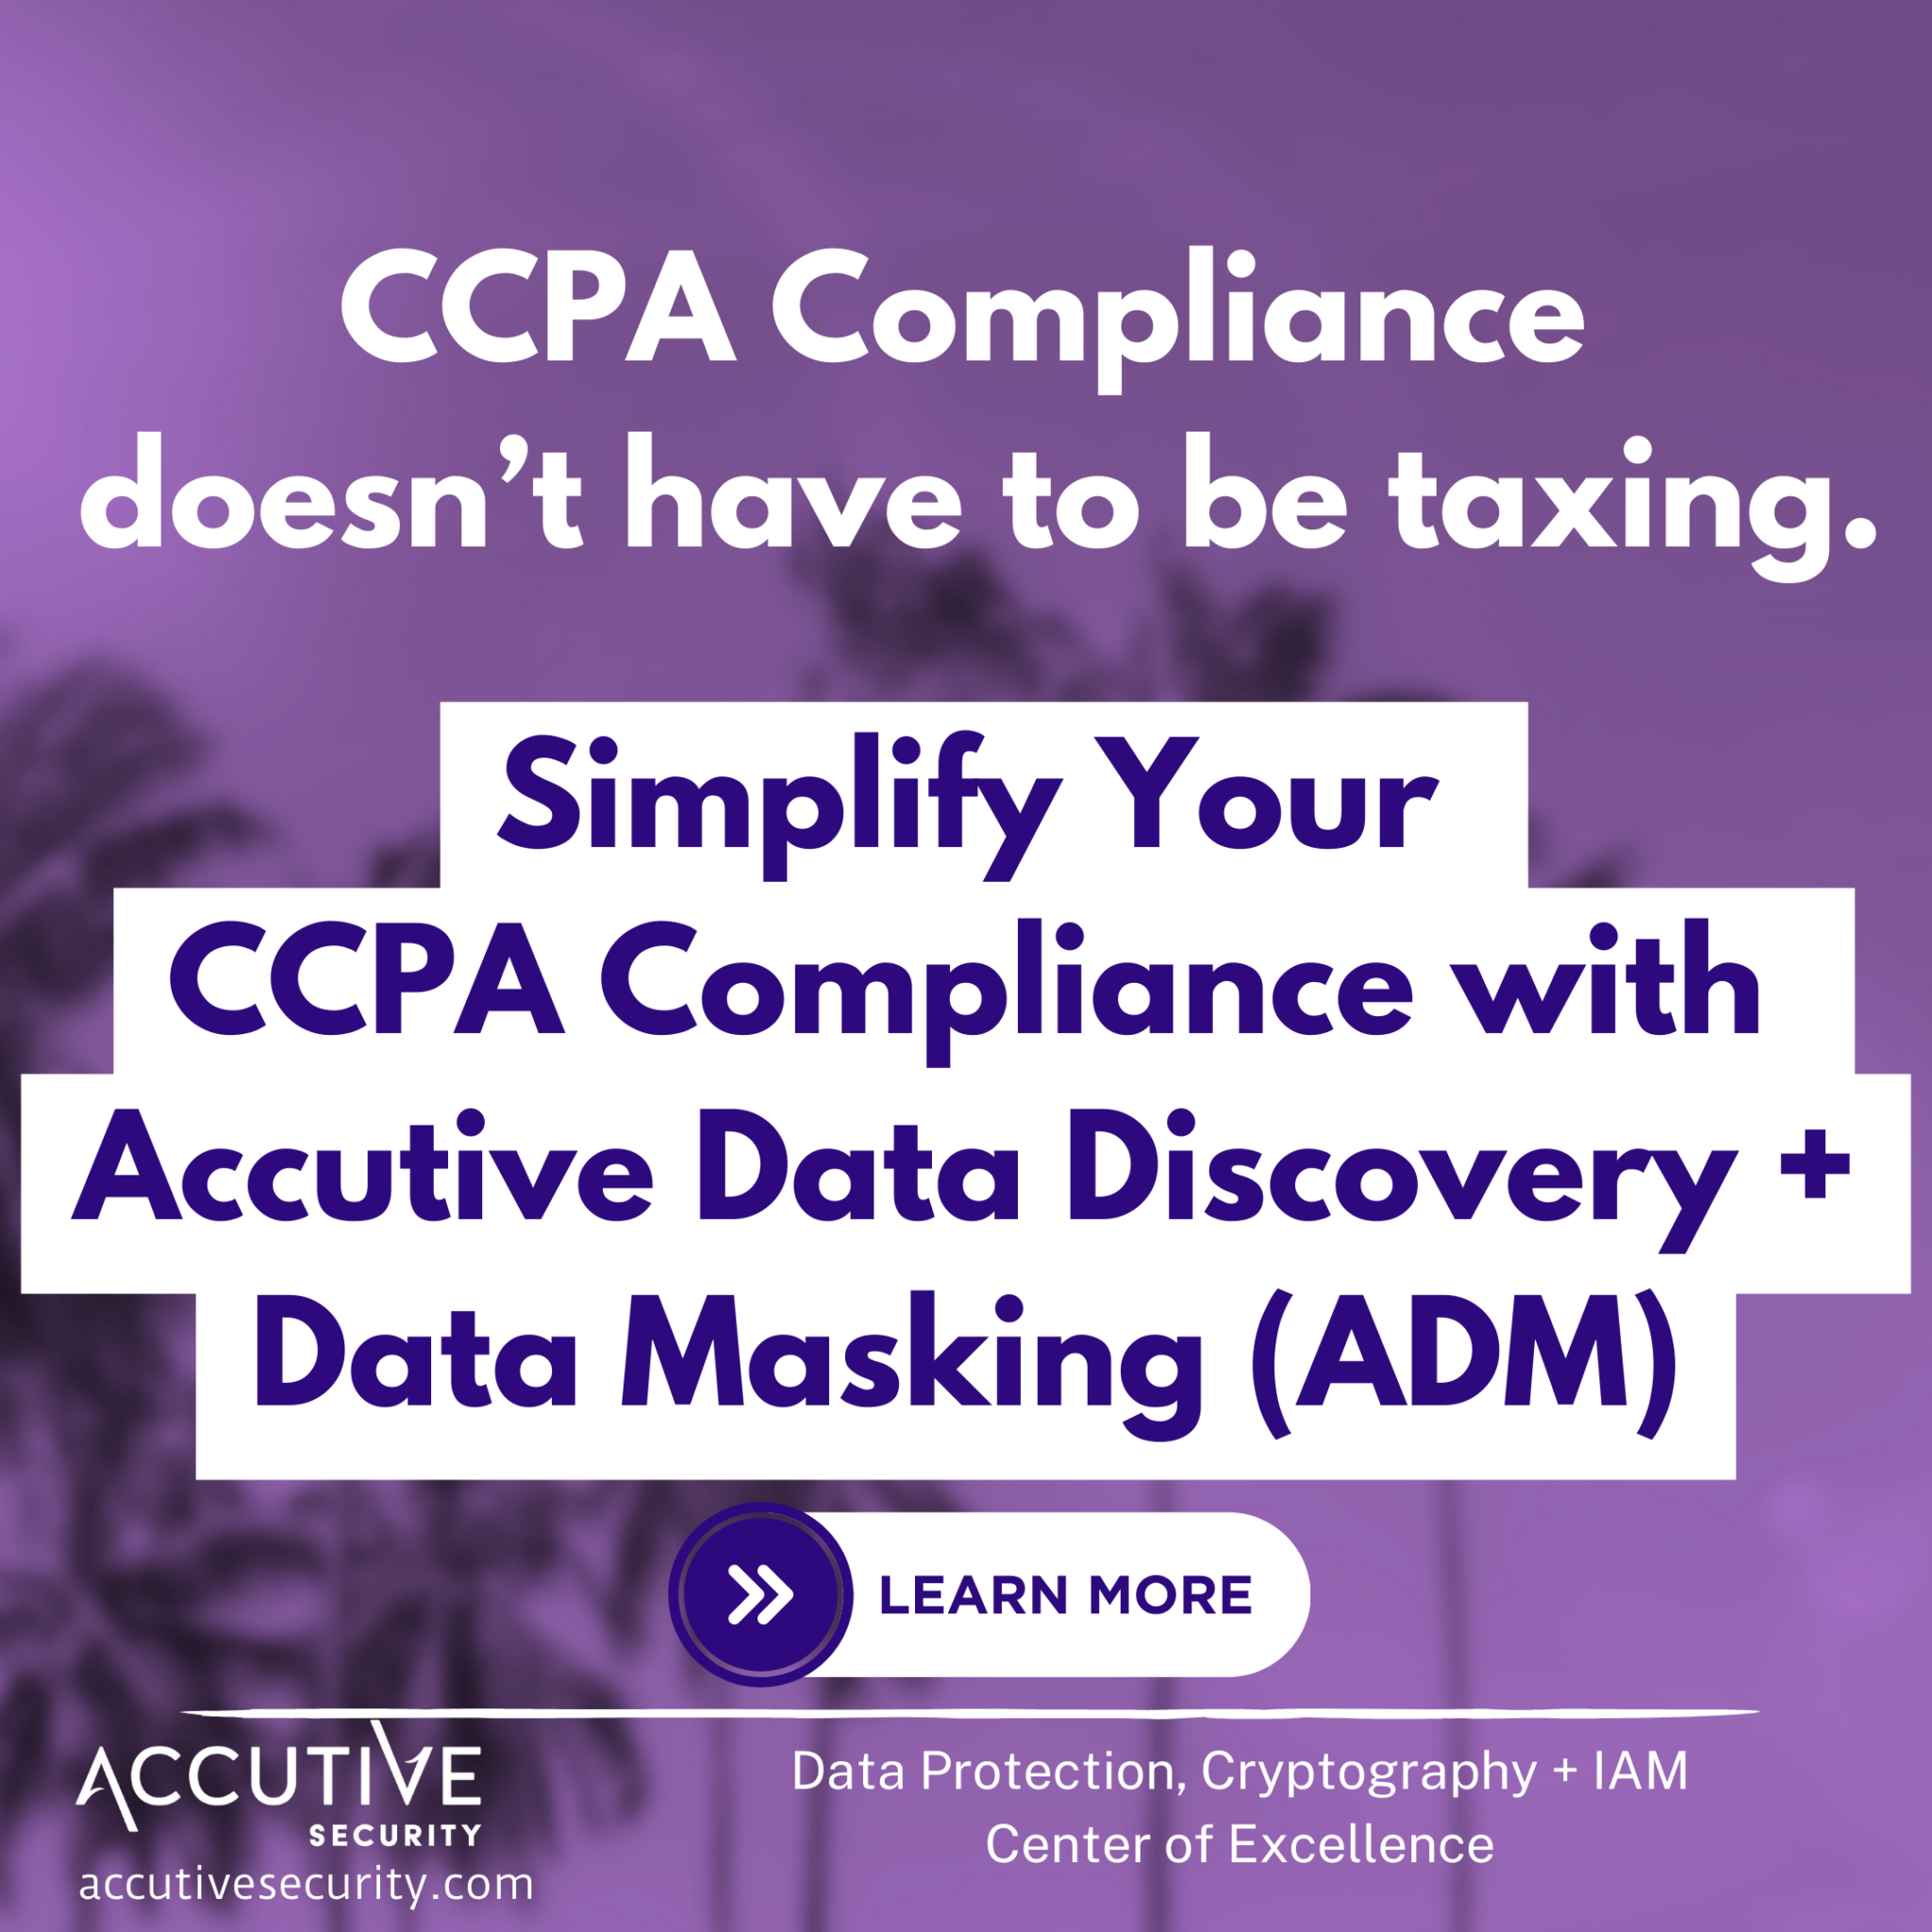 California Consumer Privacy Act (CCPA) compliance with Accutive Data Discovery and Masking (ADM)